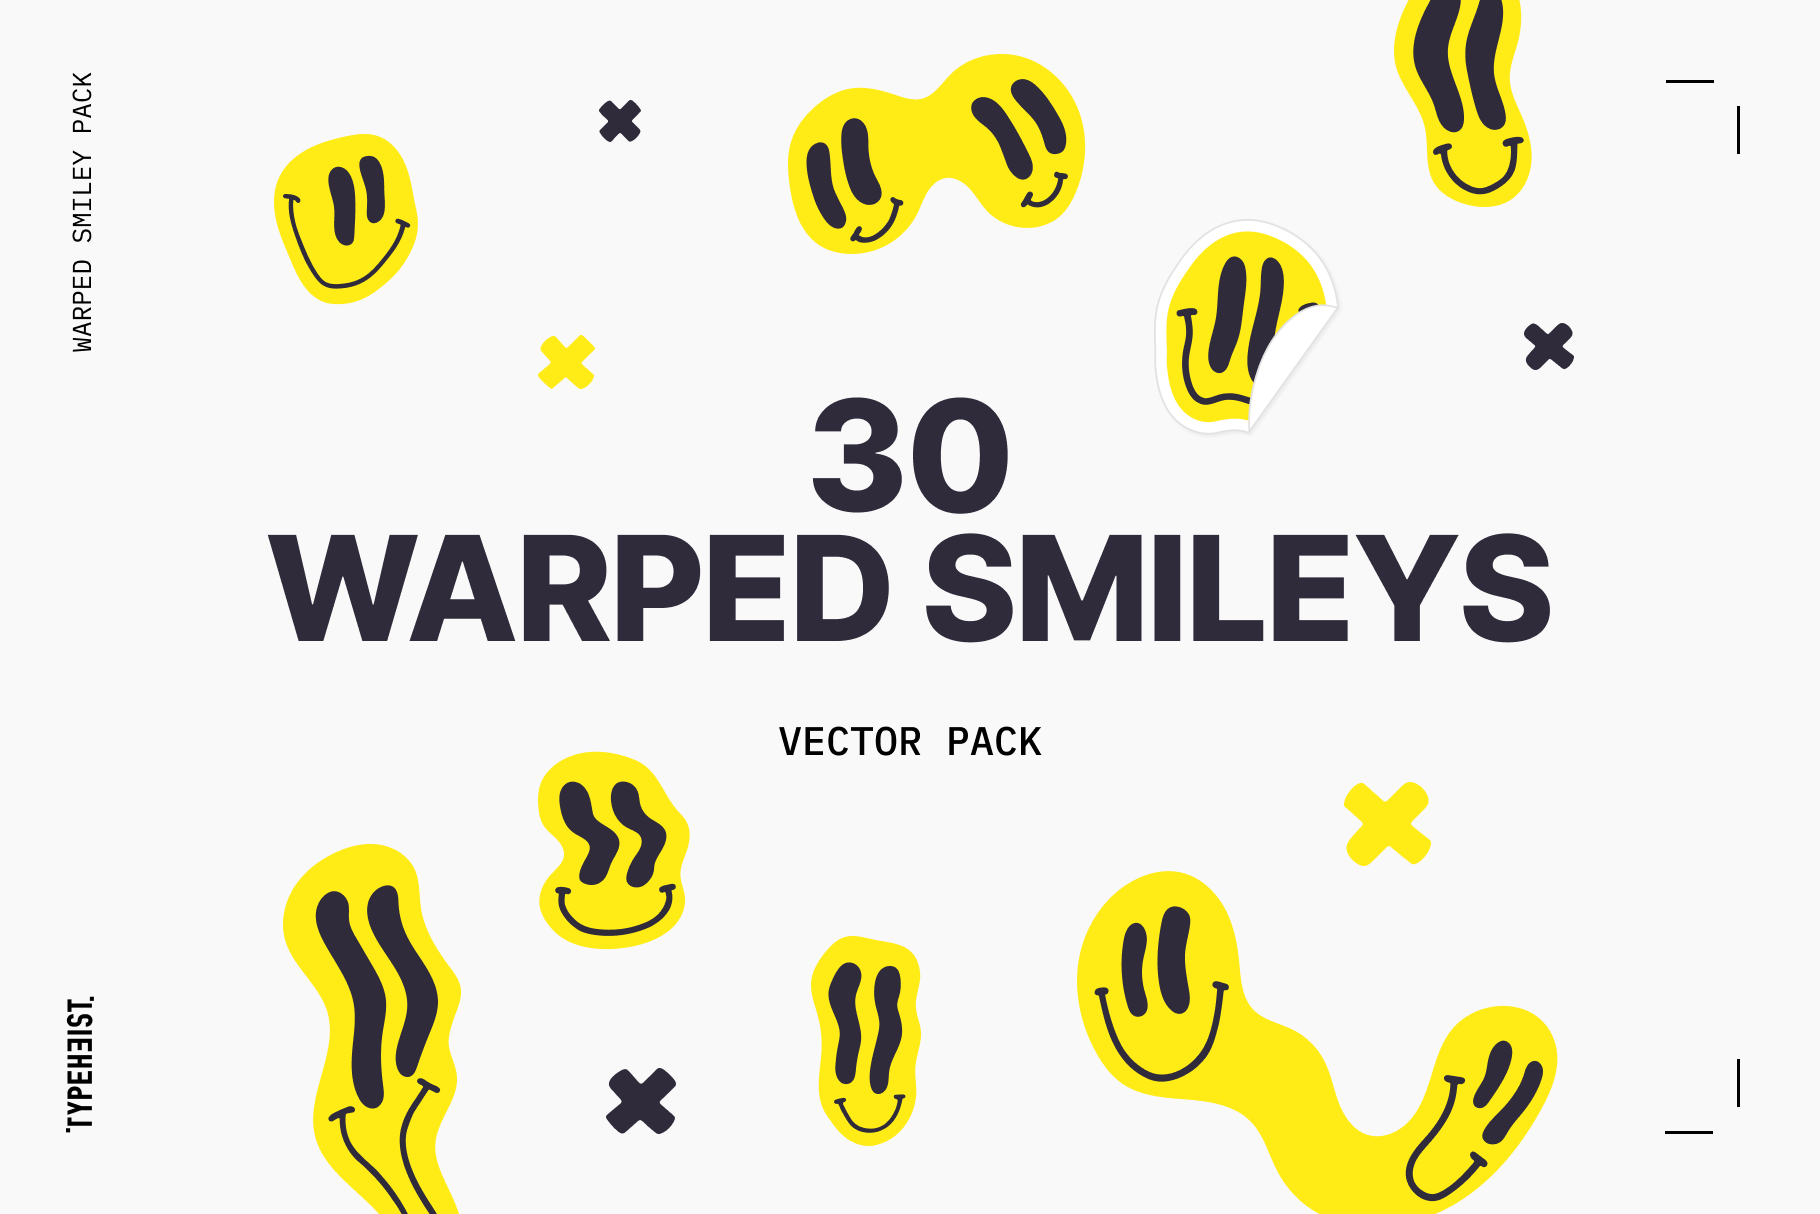 Warped Smiley Vector Pack: A vector pack with 30 warped smileys + 20 bonus assets. Good times.